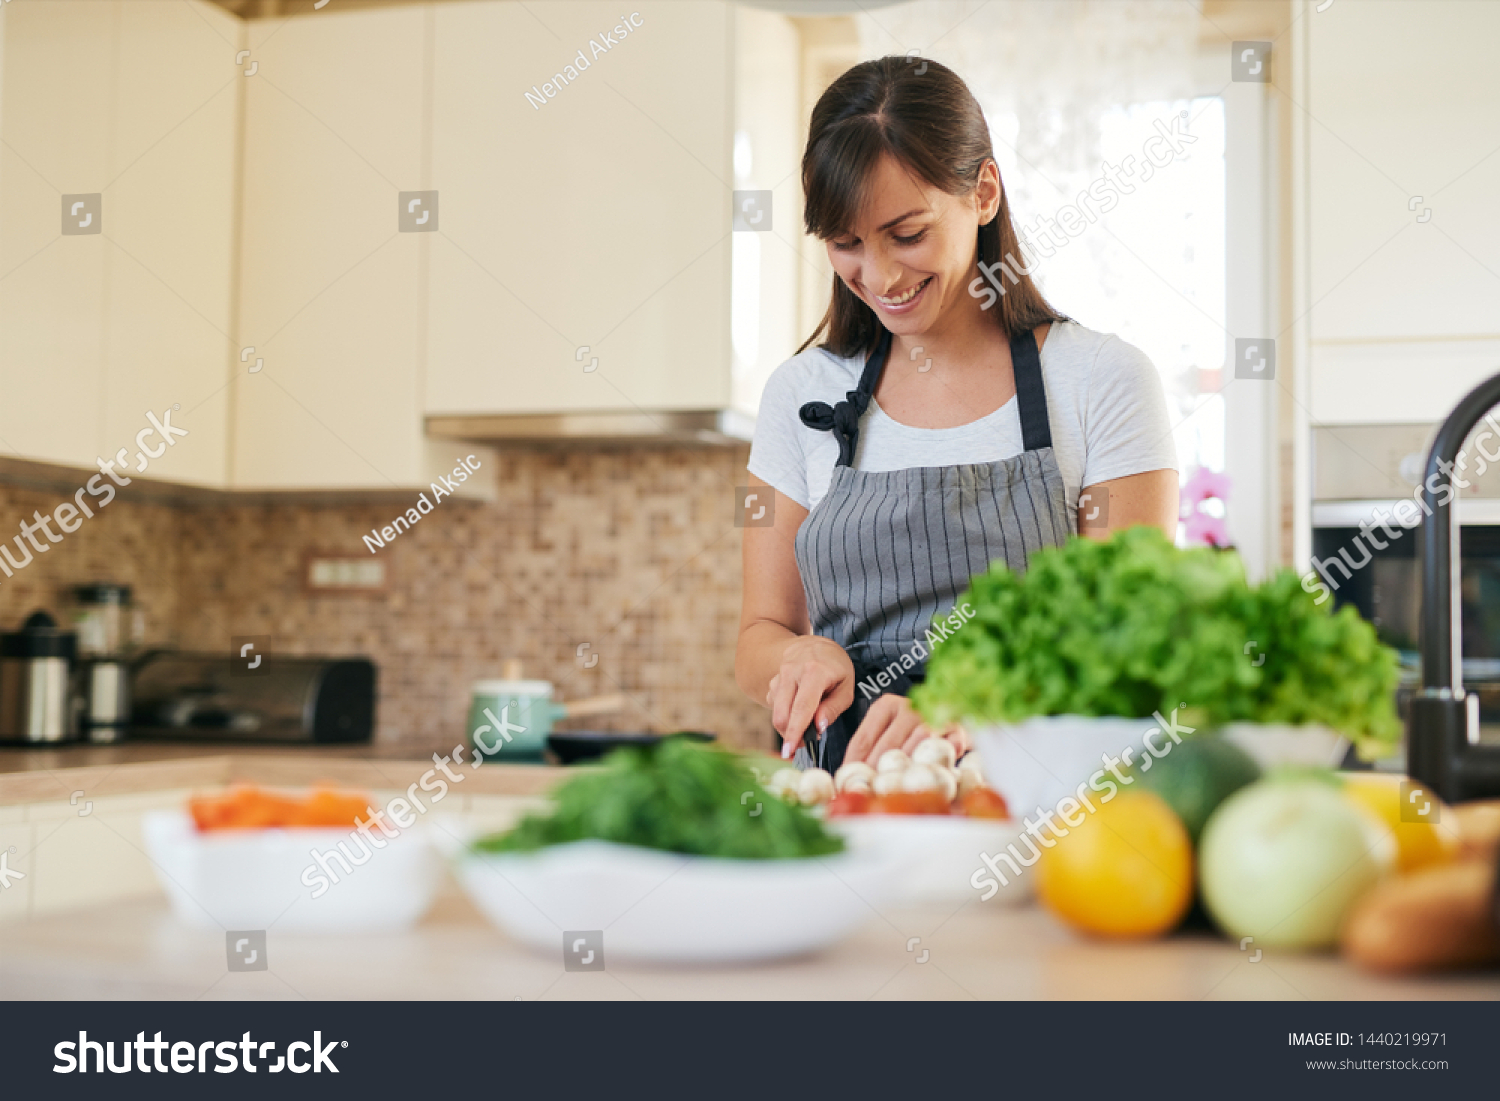 Beautiful smiling dedicated Caucasian brunette in apron standing in kitchen and chopping mushrooms. On table are lots of vegetables. Cooking at home concept. #1440219971